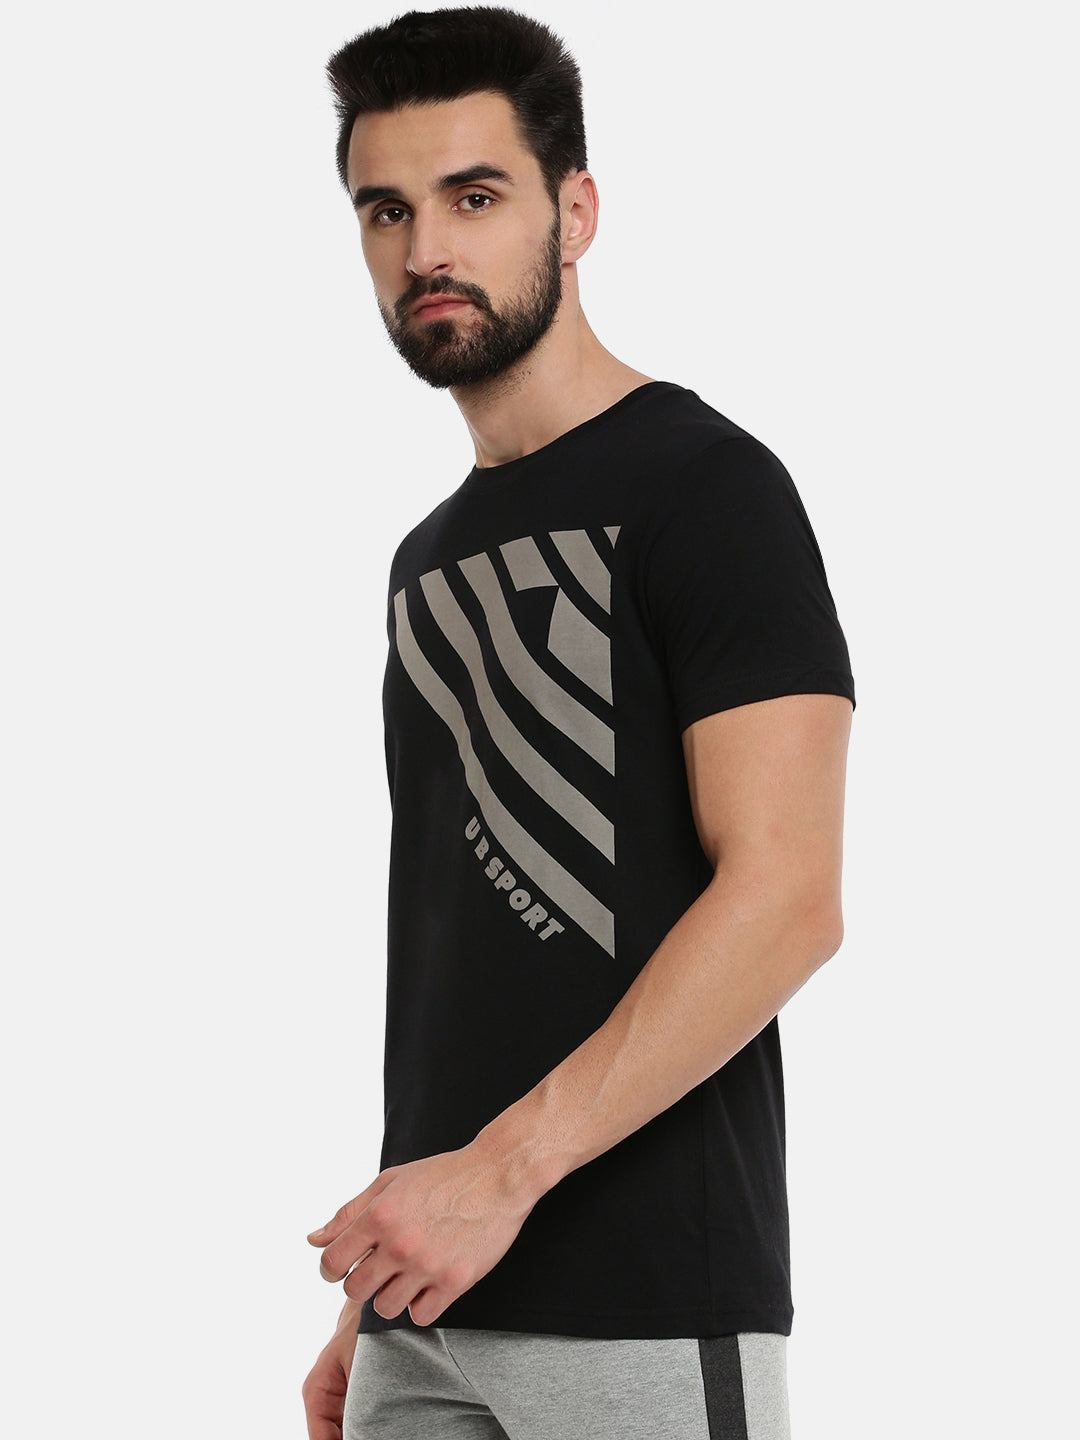 Graphic Printed Black Cotton Blend Round Neck T-Shirt GT15-Side view